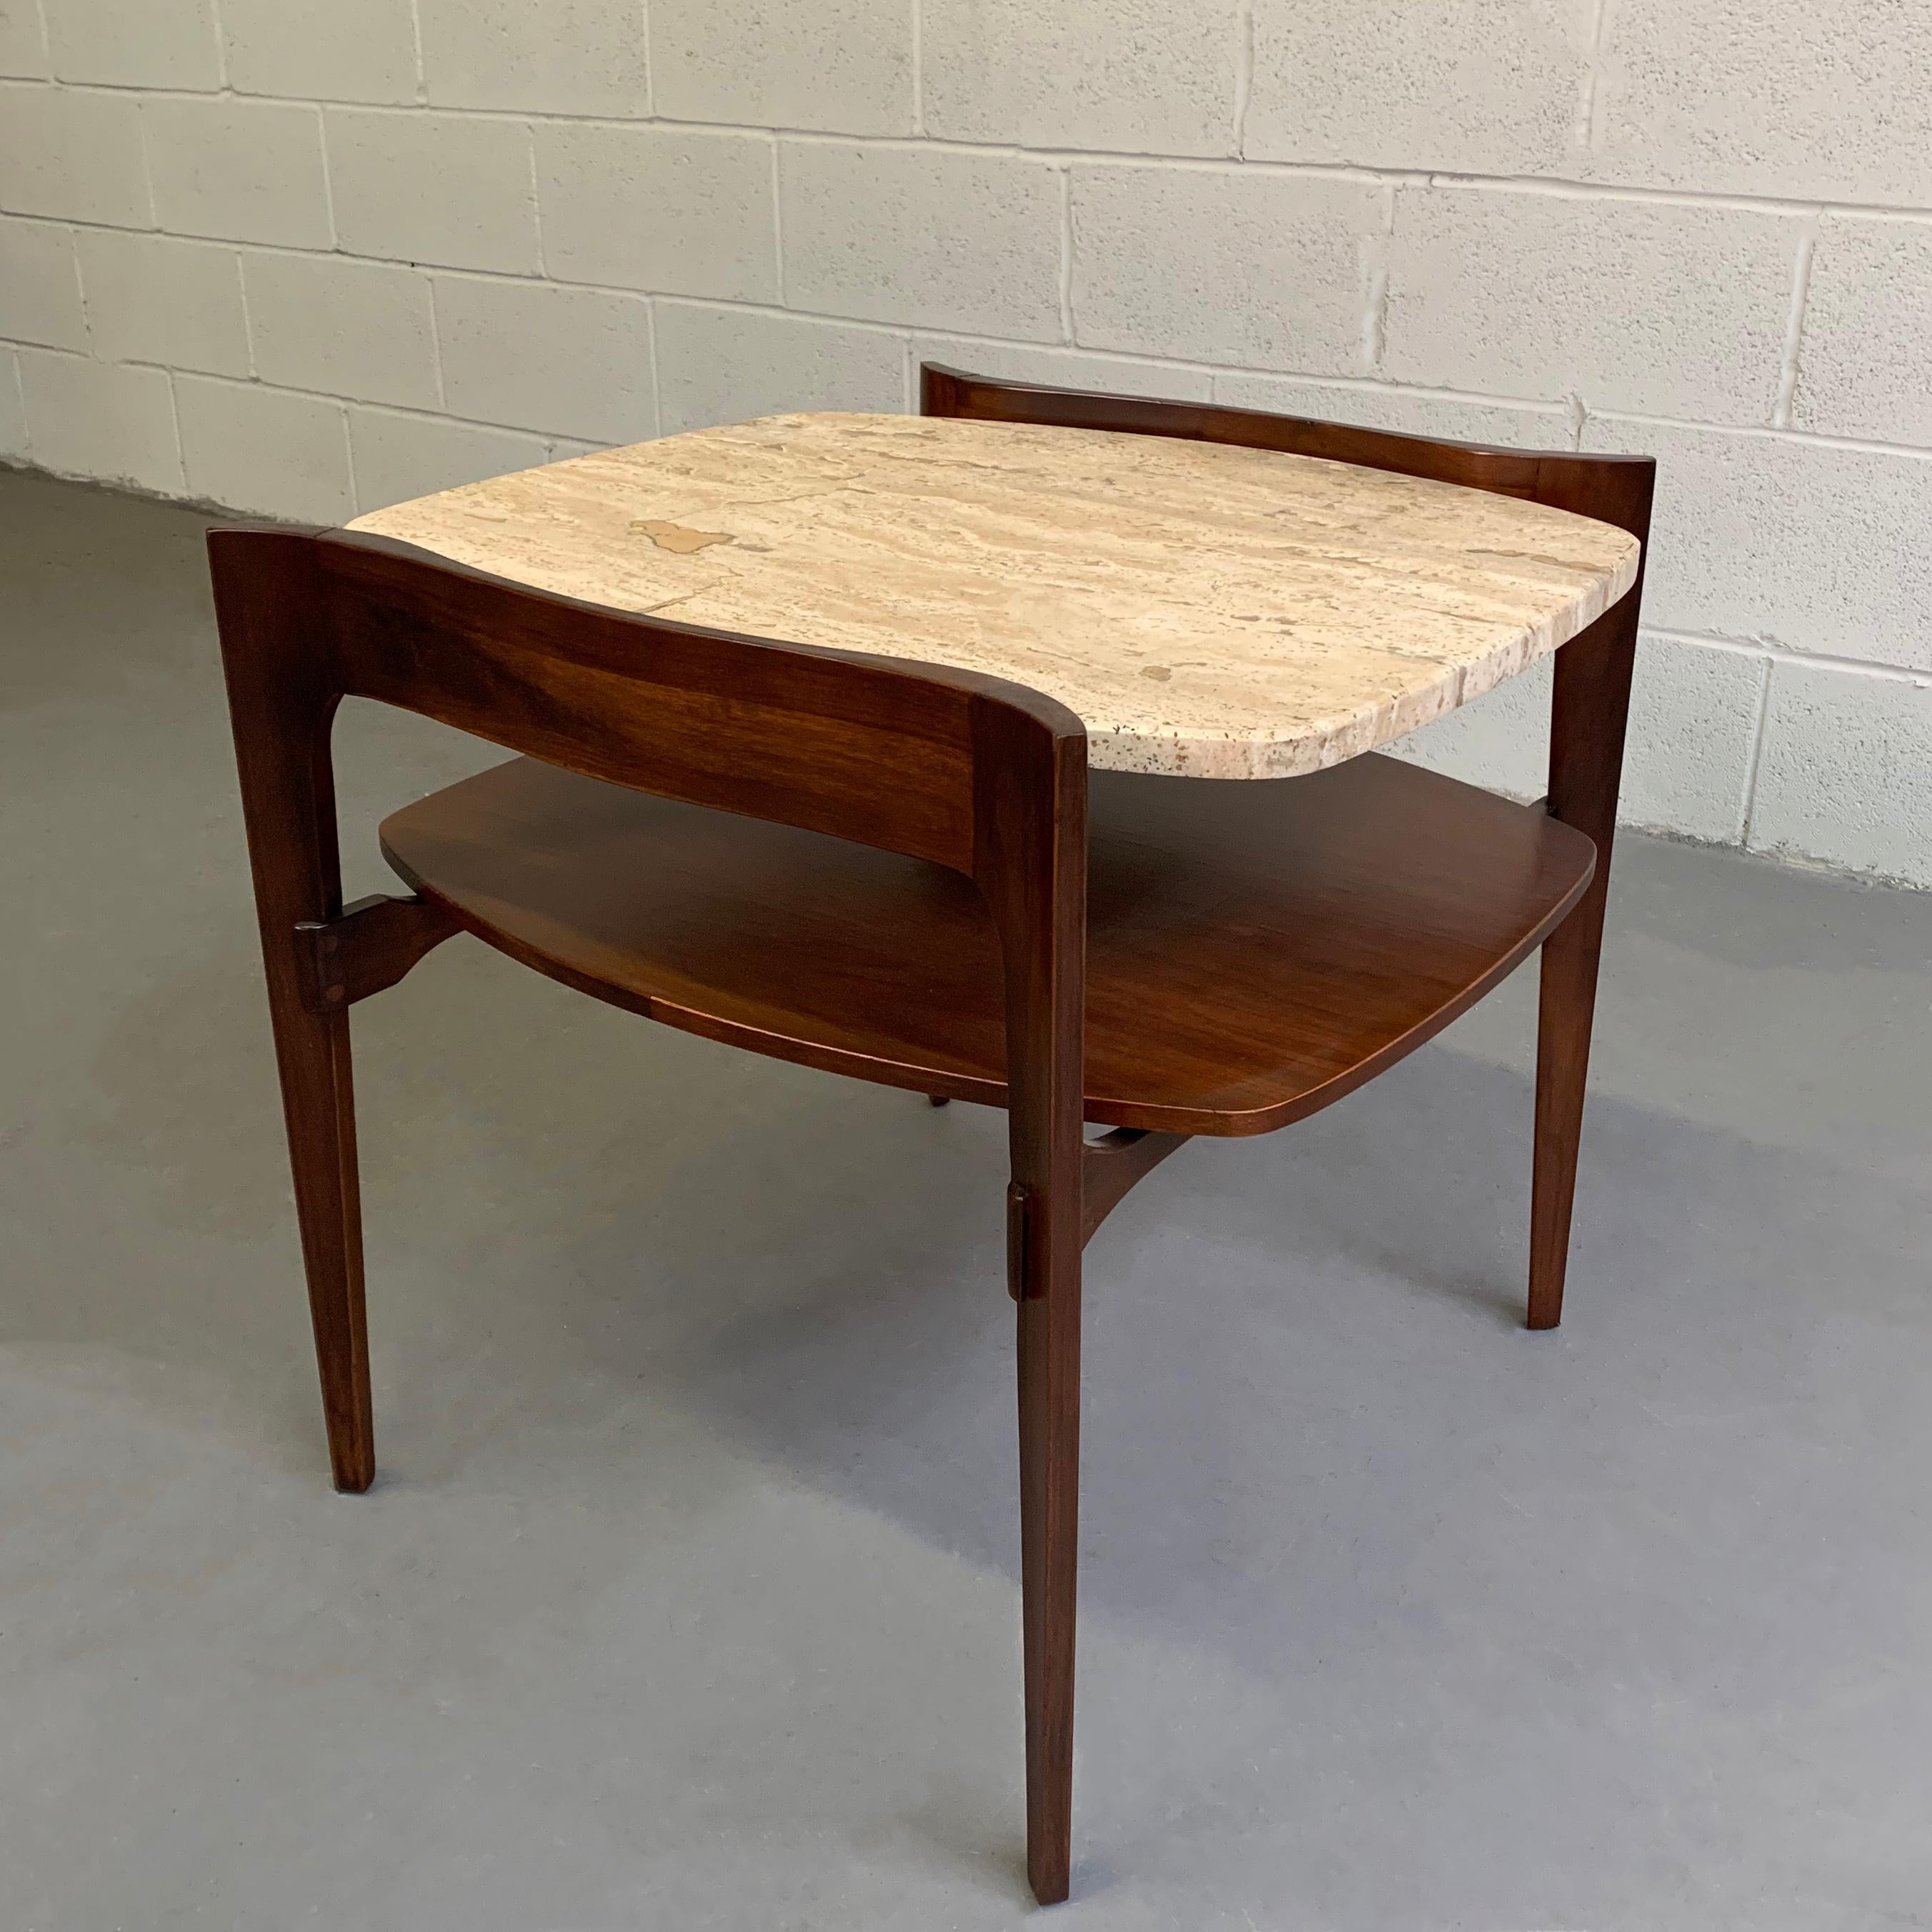 American Travertine and Walnut Side Table by Bertha Schaefer